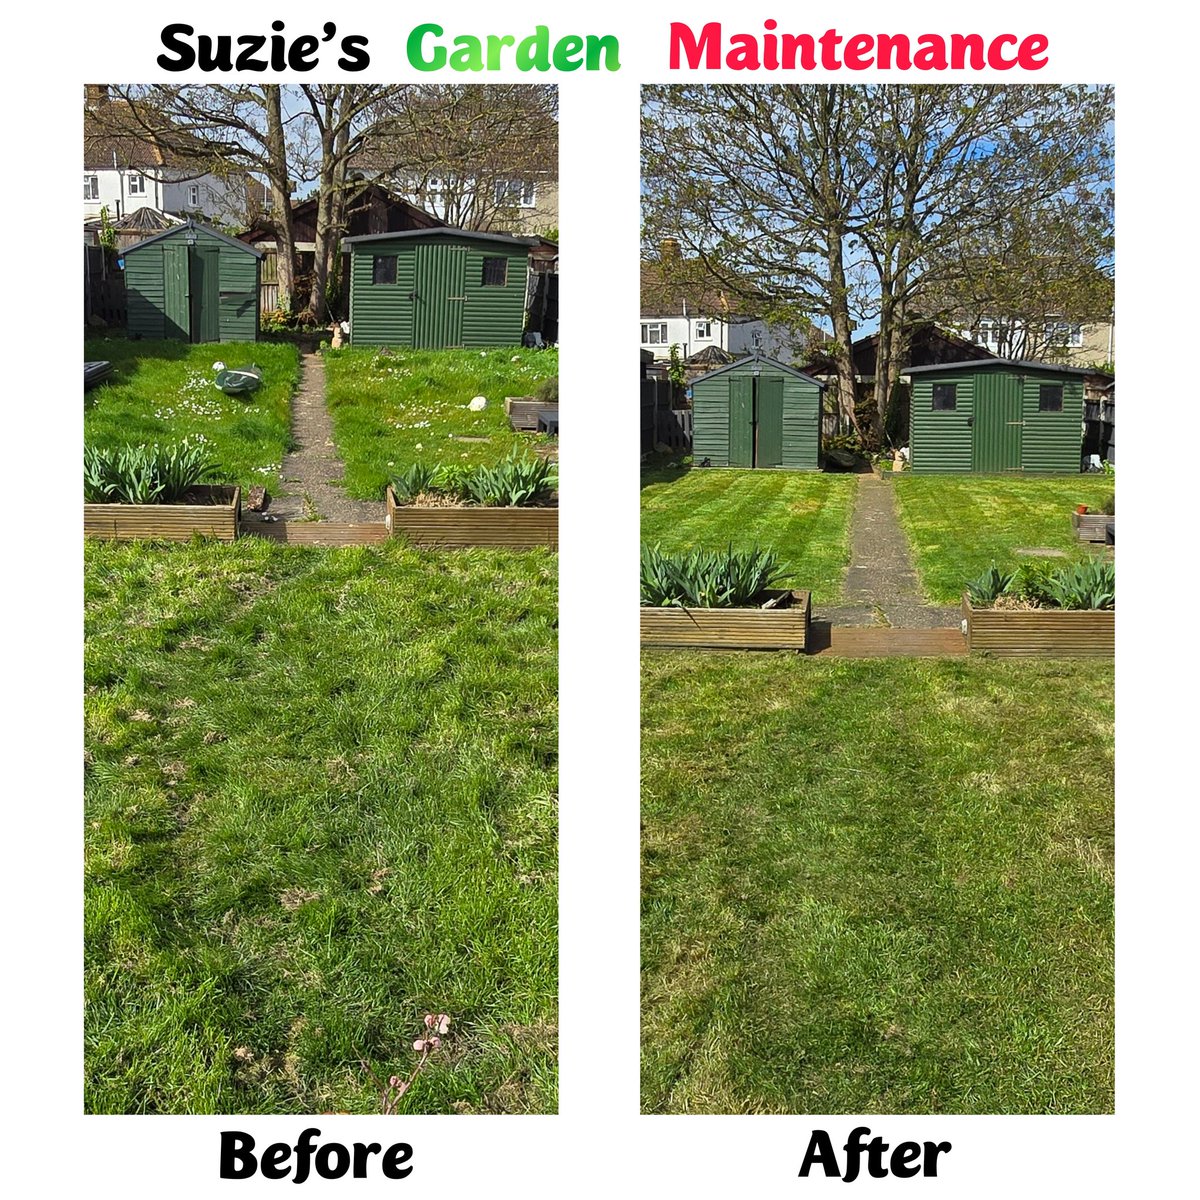 🌳 🏠 🌾 Domestic Garden Maintenance Service 

📷 #Before #After #Gardening #Photography 

#Garden #Maintenance #Service #Essex 

🌾 #Grass_Cutting #Strimming #Mowing #Lawns 
❤️ #Honda 🧡 #Stihl #Power #Machinery 
🧹 #Tidy_up #Pathways 
♻️ #Recycling #GreenWaste #CompostHeap